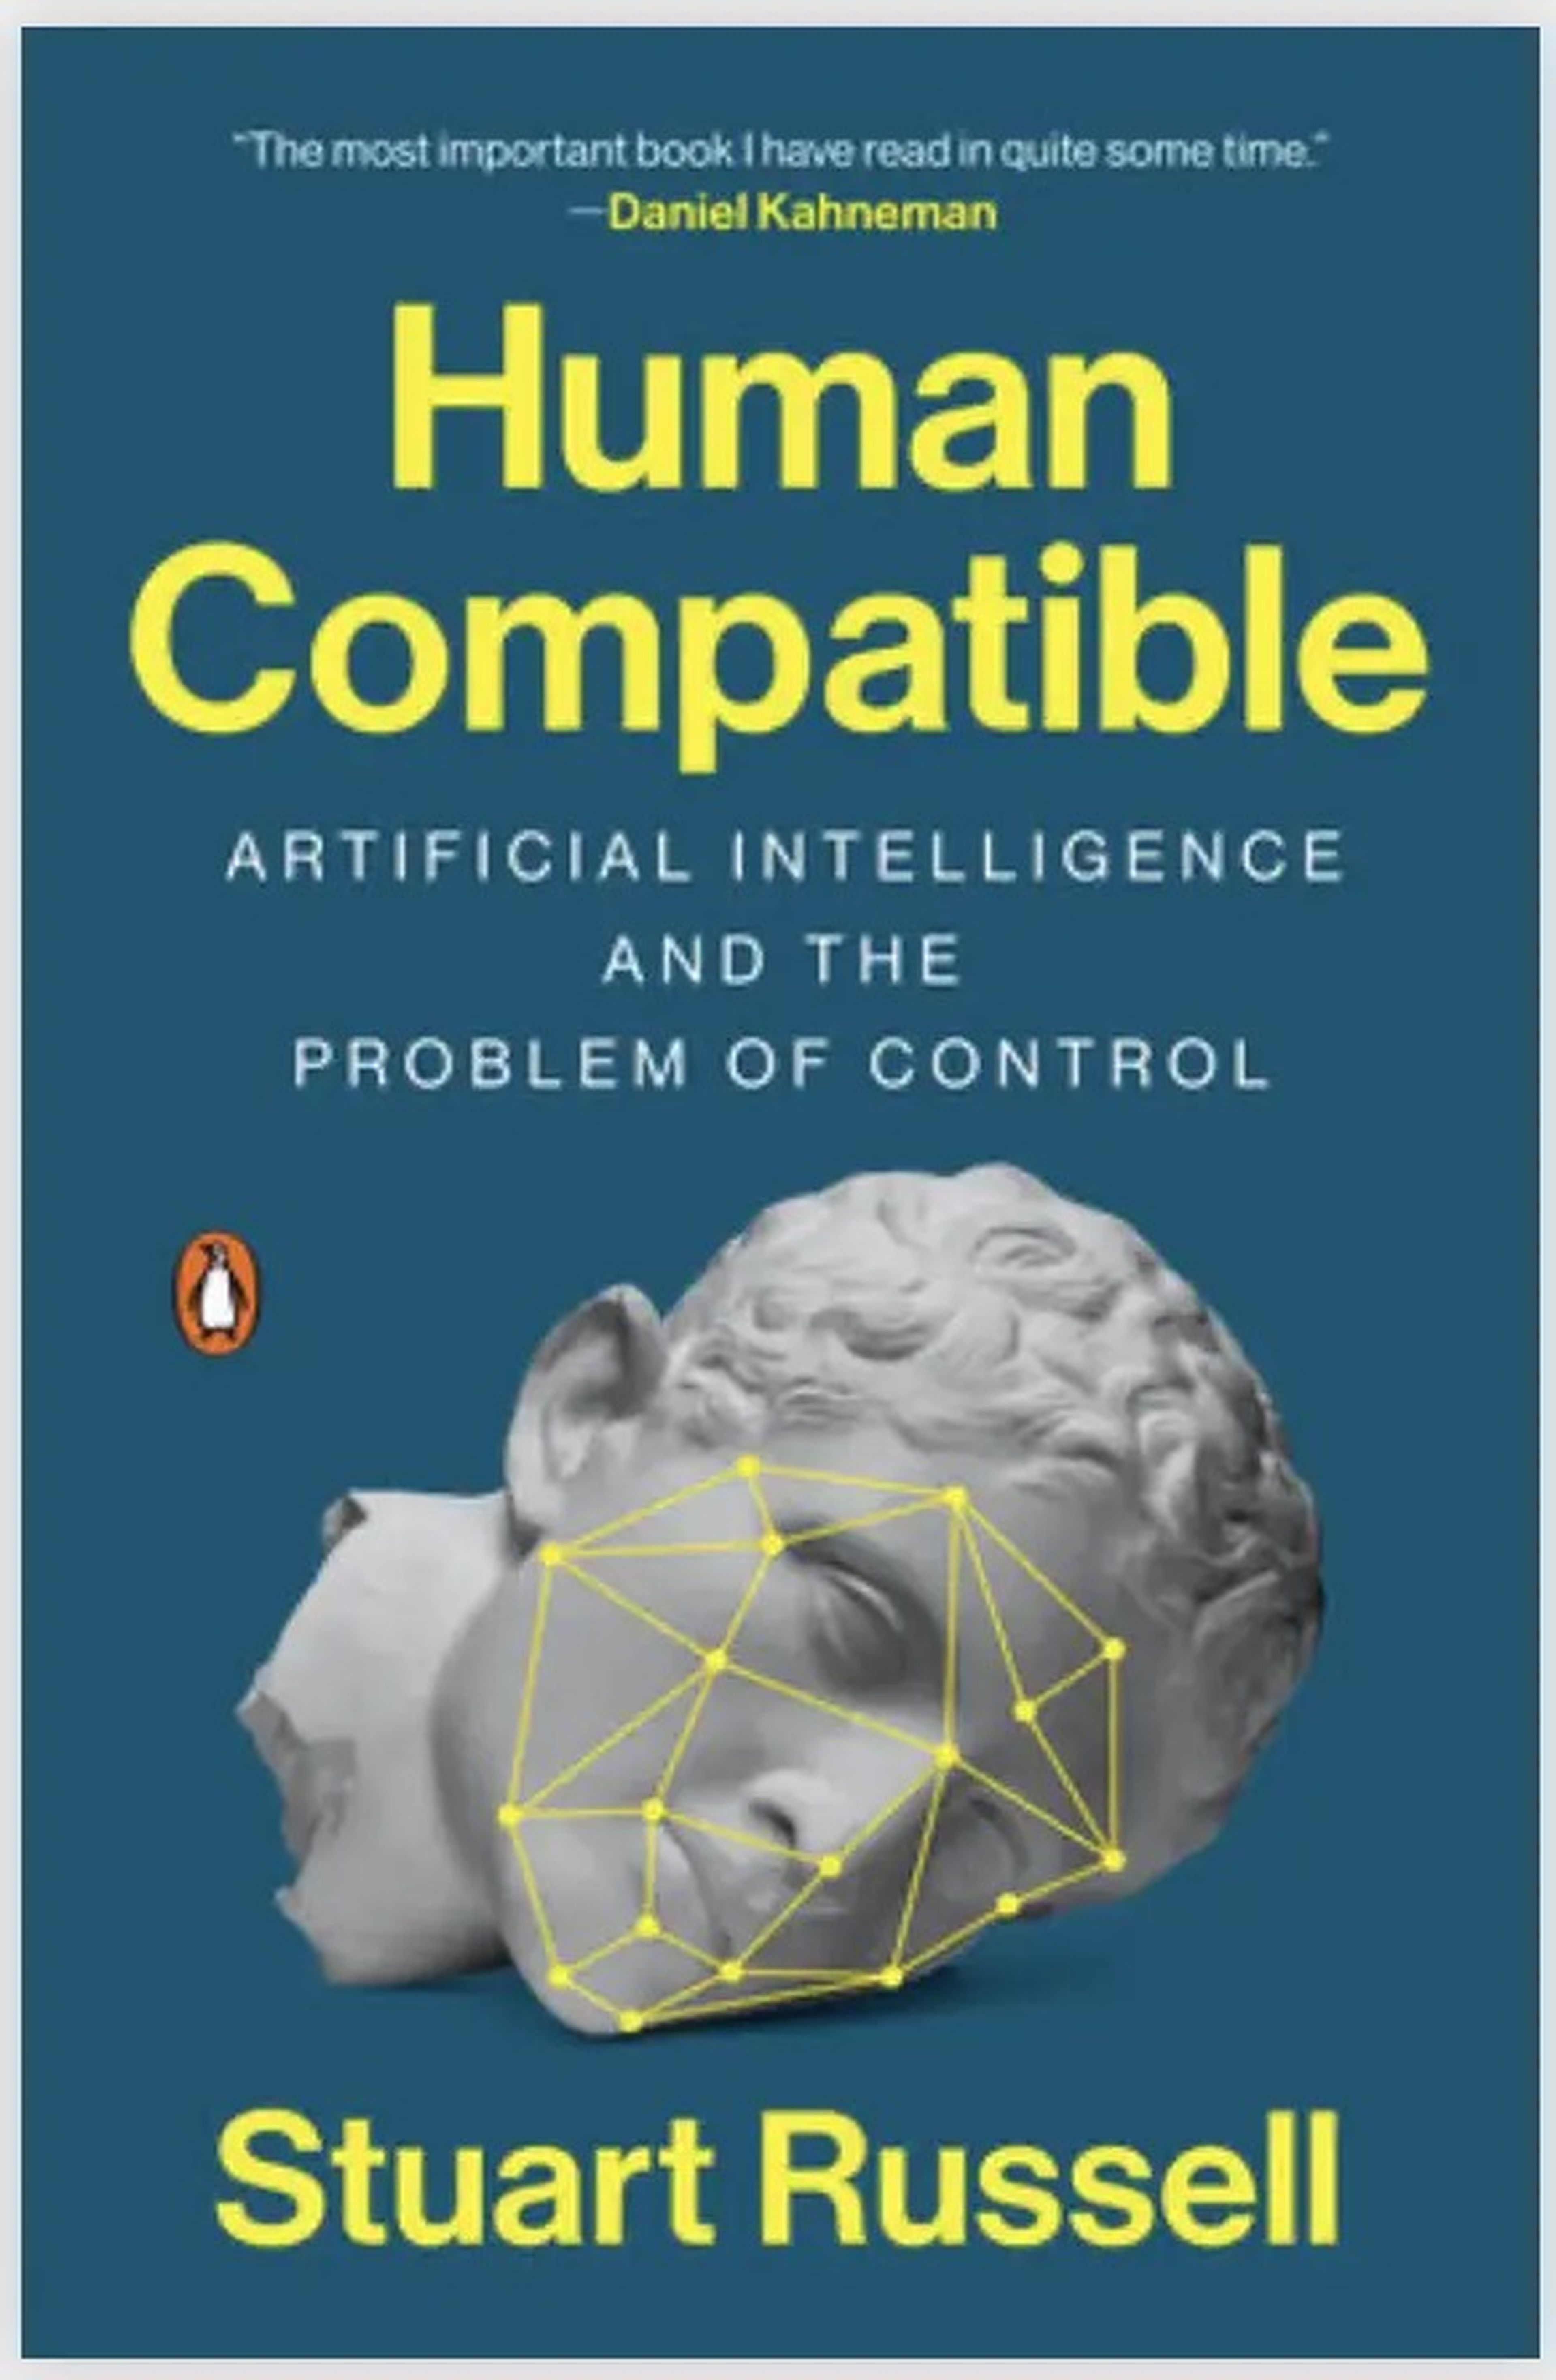 Human Compatible: Artificial Intelligence and the Problem of ControlHuman Compatible: Artificial Intelligence and the Problem of Control